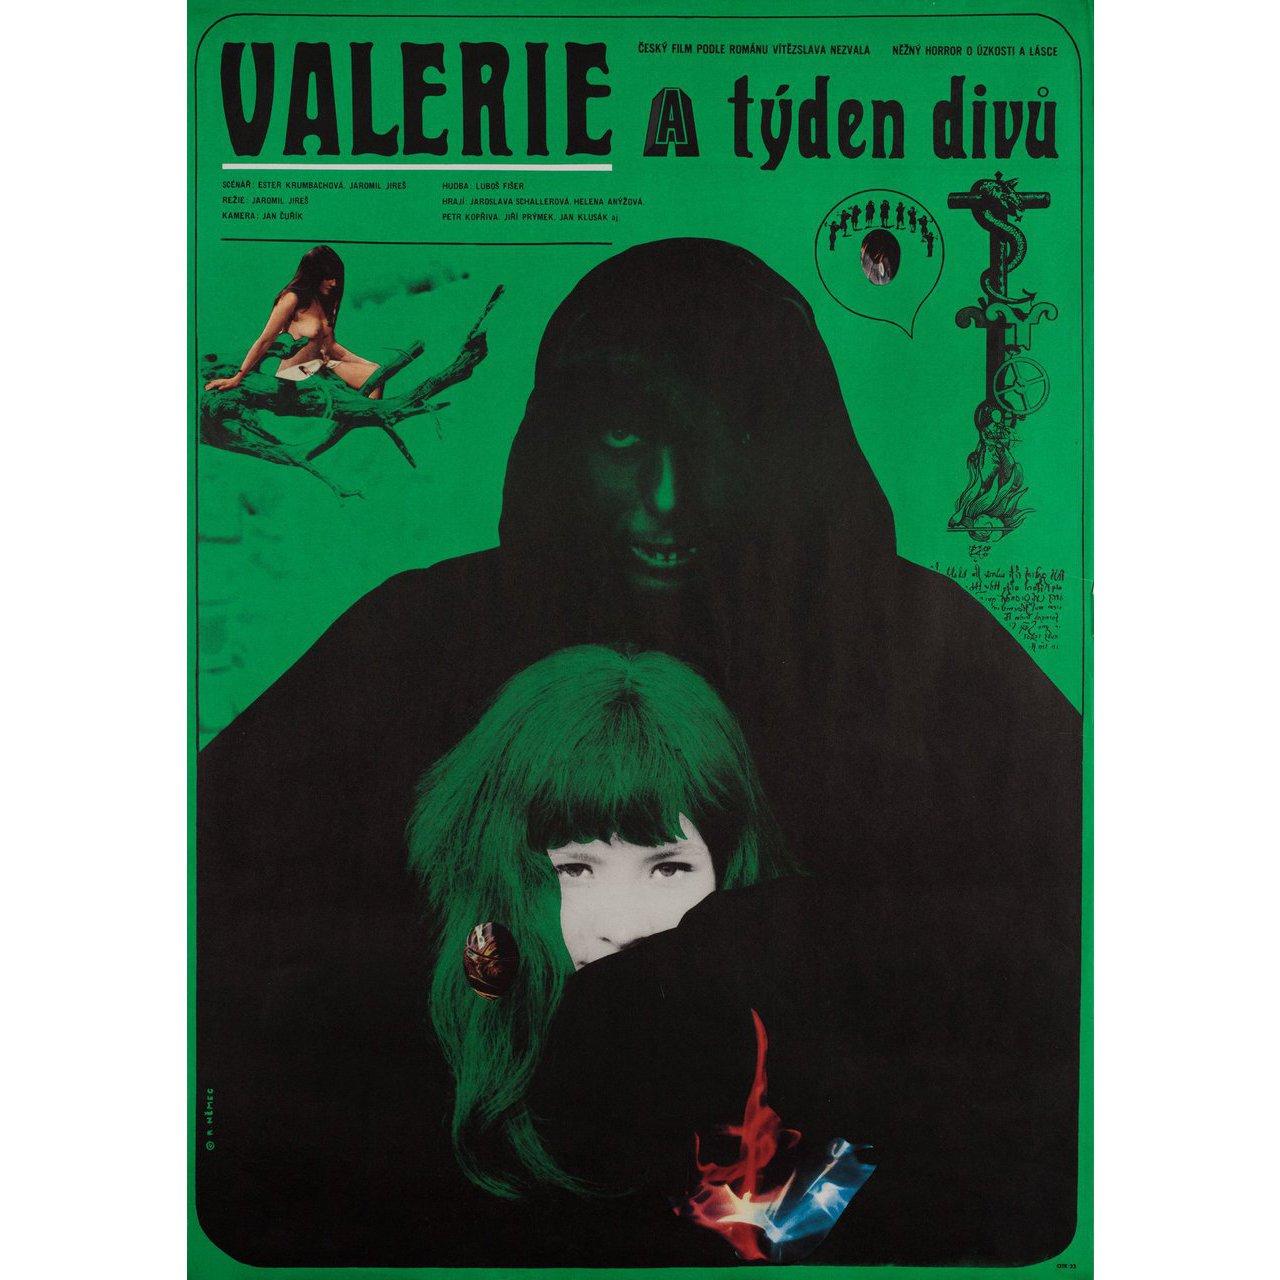 Original 1970 Czech A1 poster by Rudolph Nemec for the film Valerie and Her Week of Wonders (Valerie a tyden divu) directed by Jaromil Jires with Jaroslava Schallerova / Helena Anyzova / Petr Kopriva / Jiri Prymek. Very Good-Fine condition, rolled.